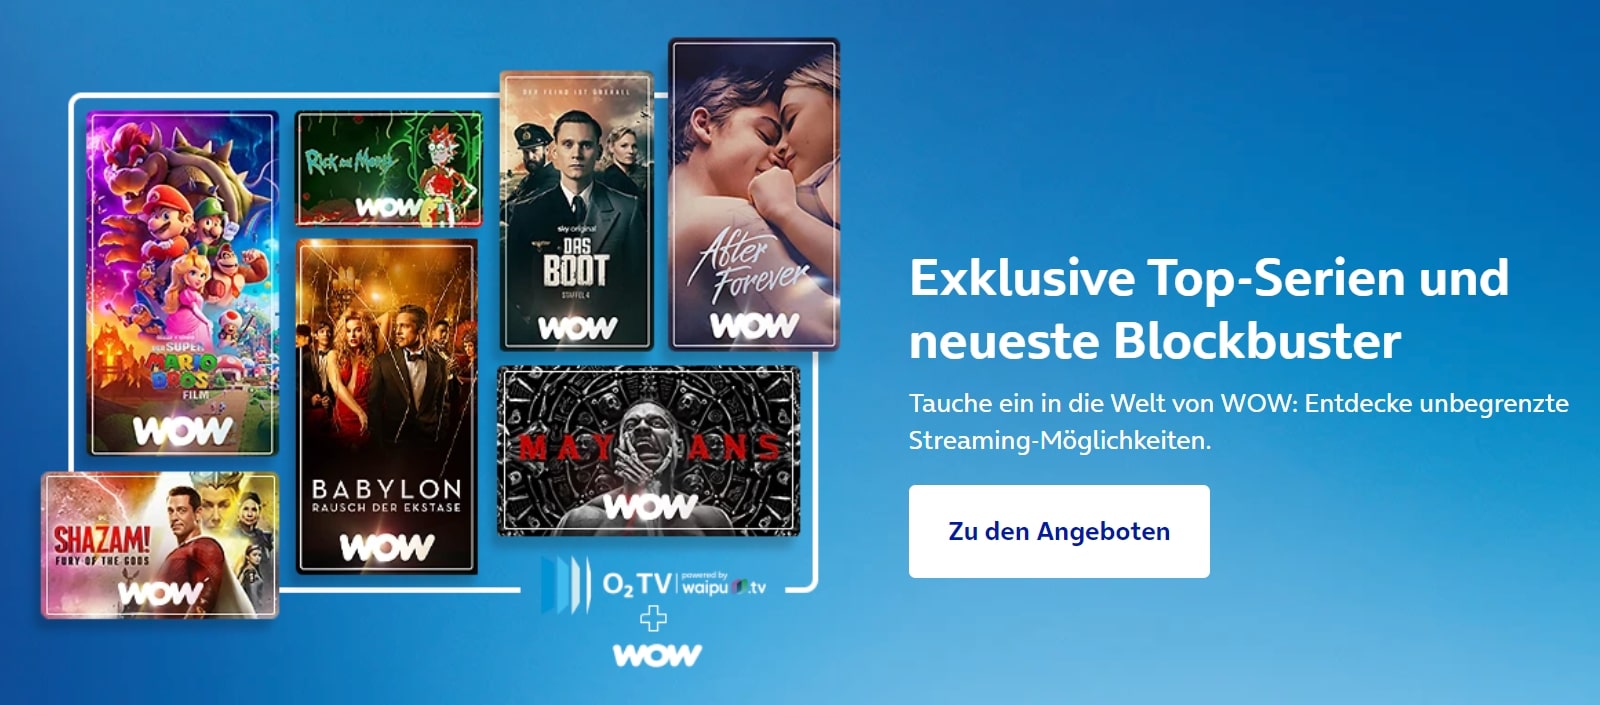 SPECIAL: O2 TV inkl. WOW - 12 Monate ab 17,49€ mtl.!